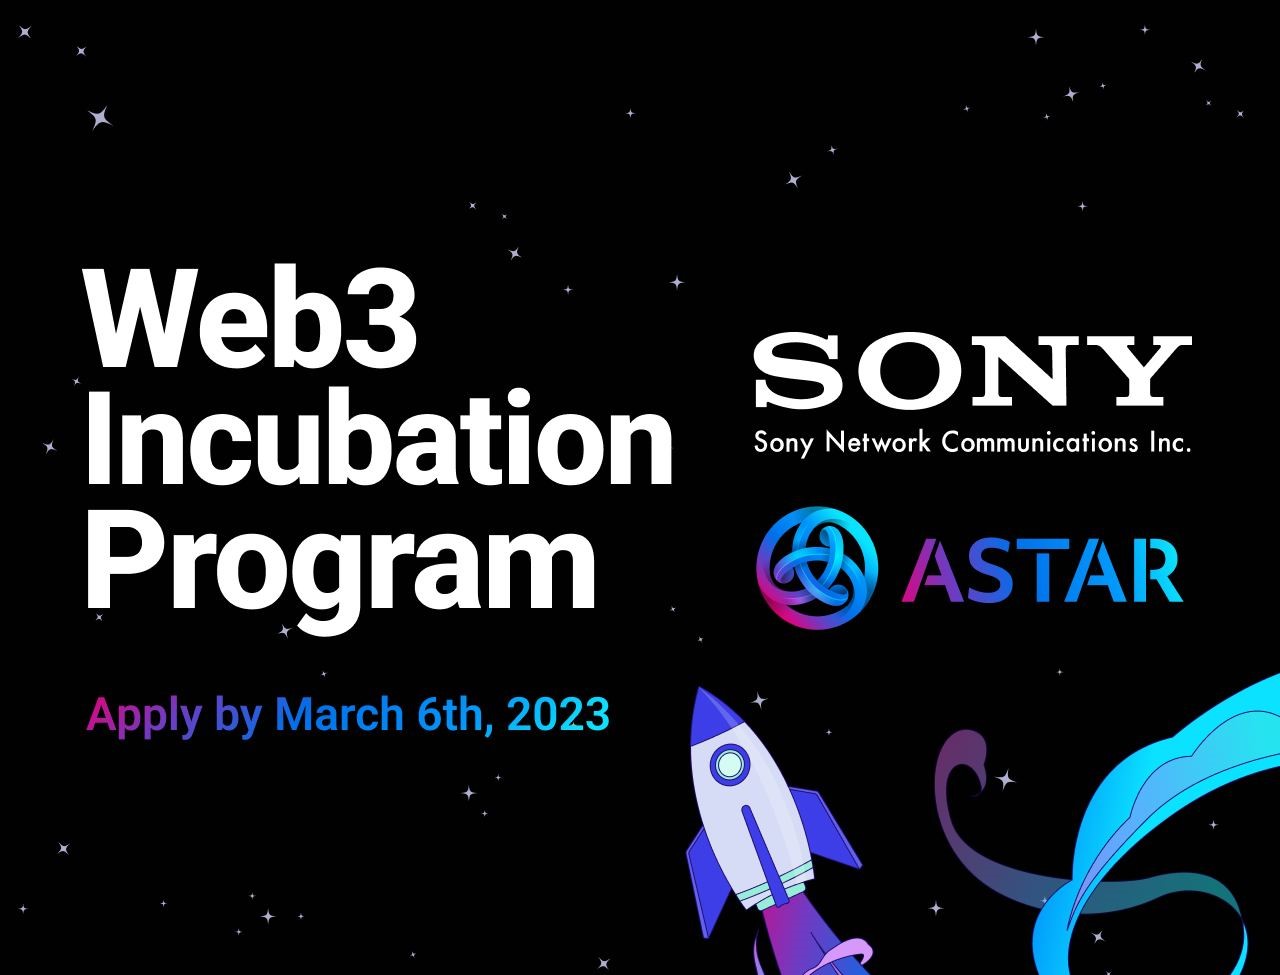 Astar Network and Sony Network Communications Launch a Collaborative Web3 Incubation Program